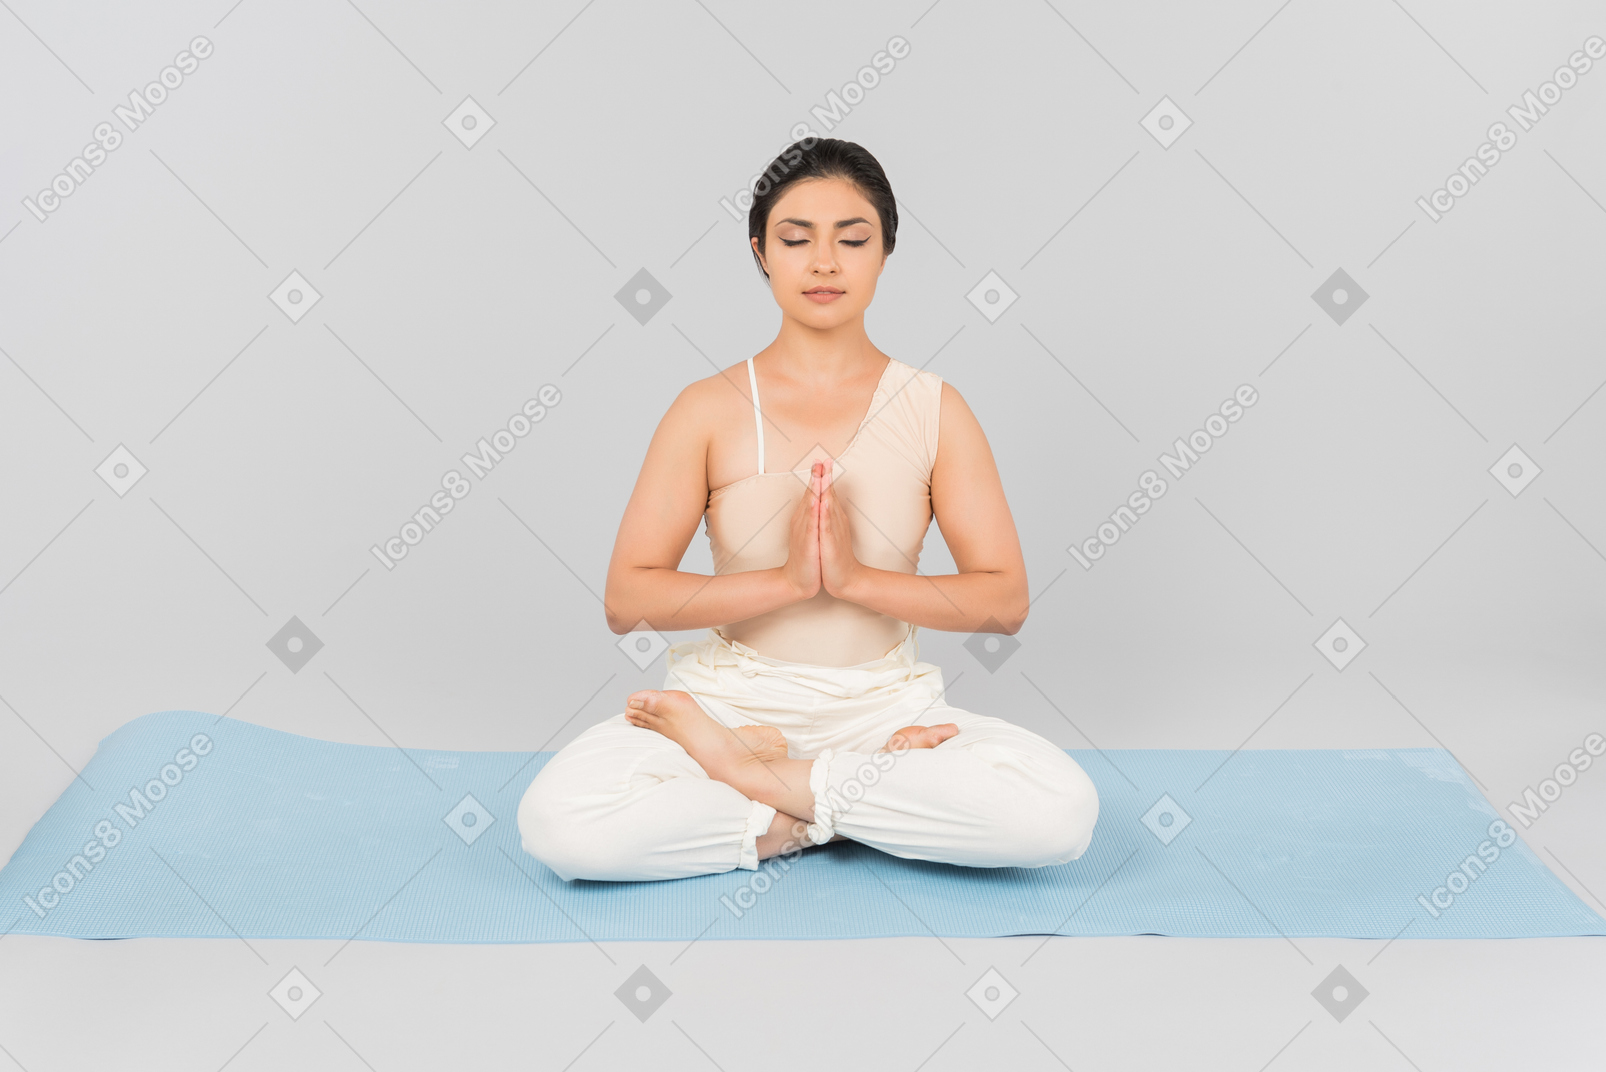 Young indian woman sitting on yoga mat with legs crossed, hands folded and eyes closed